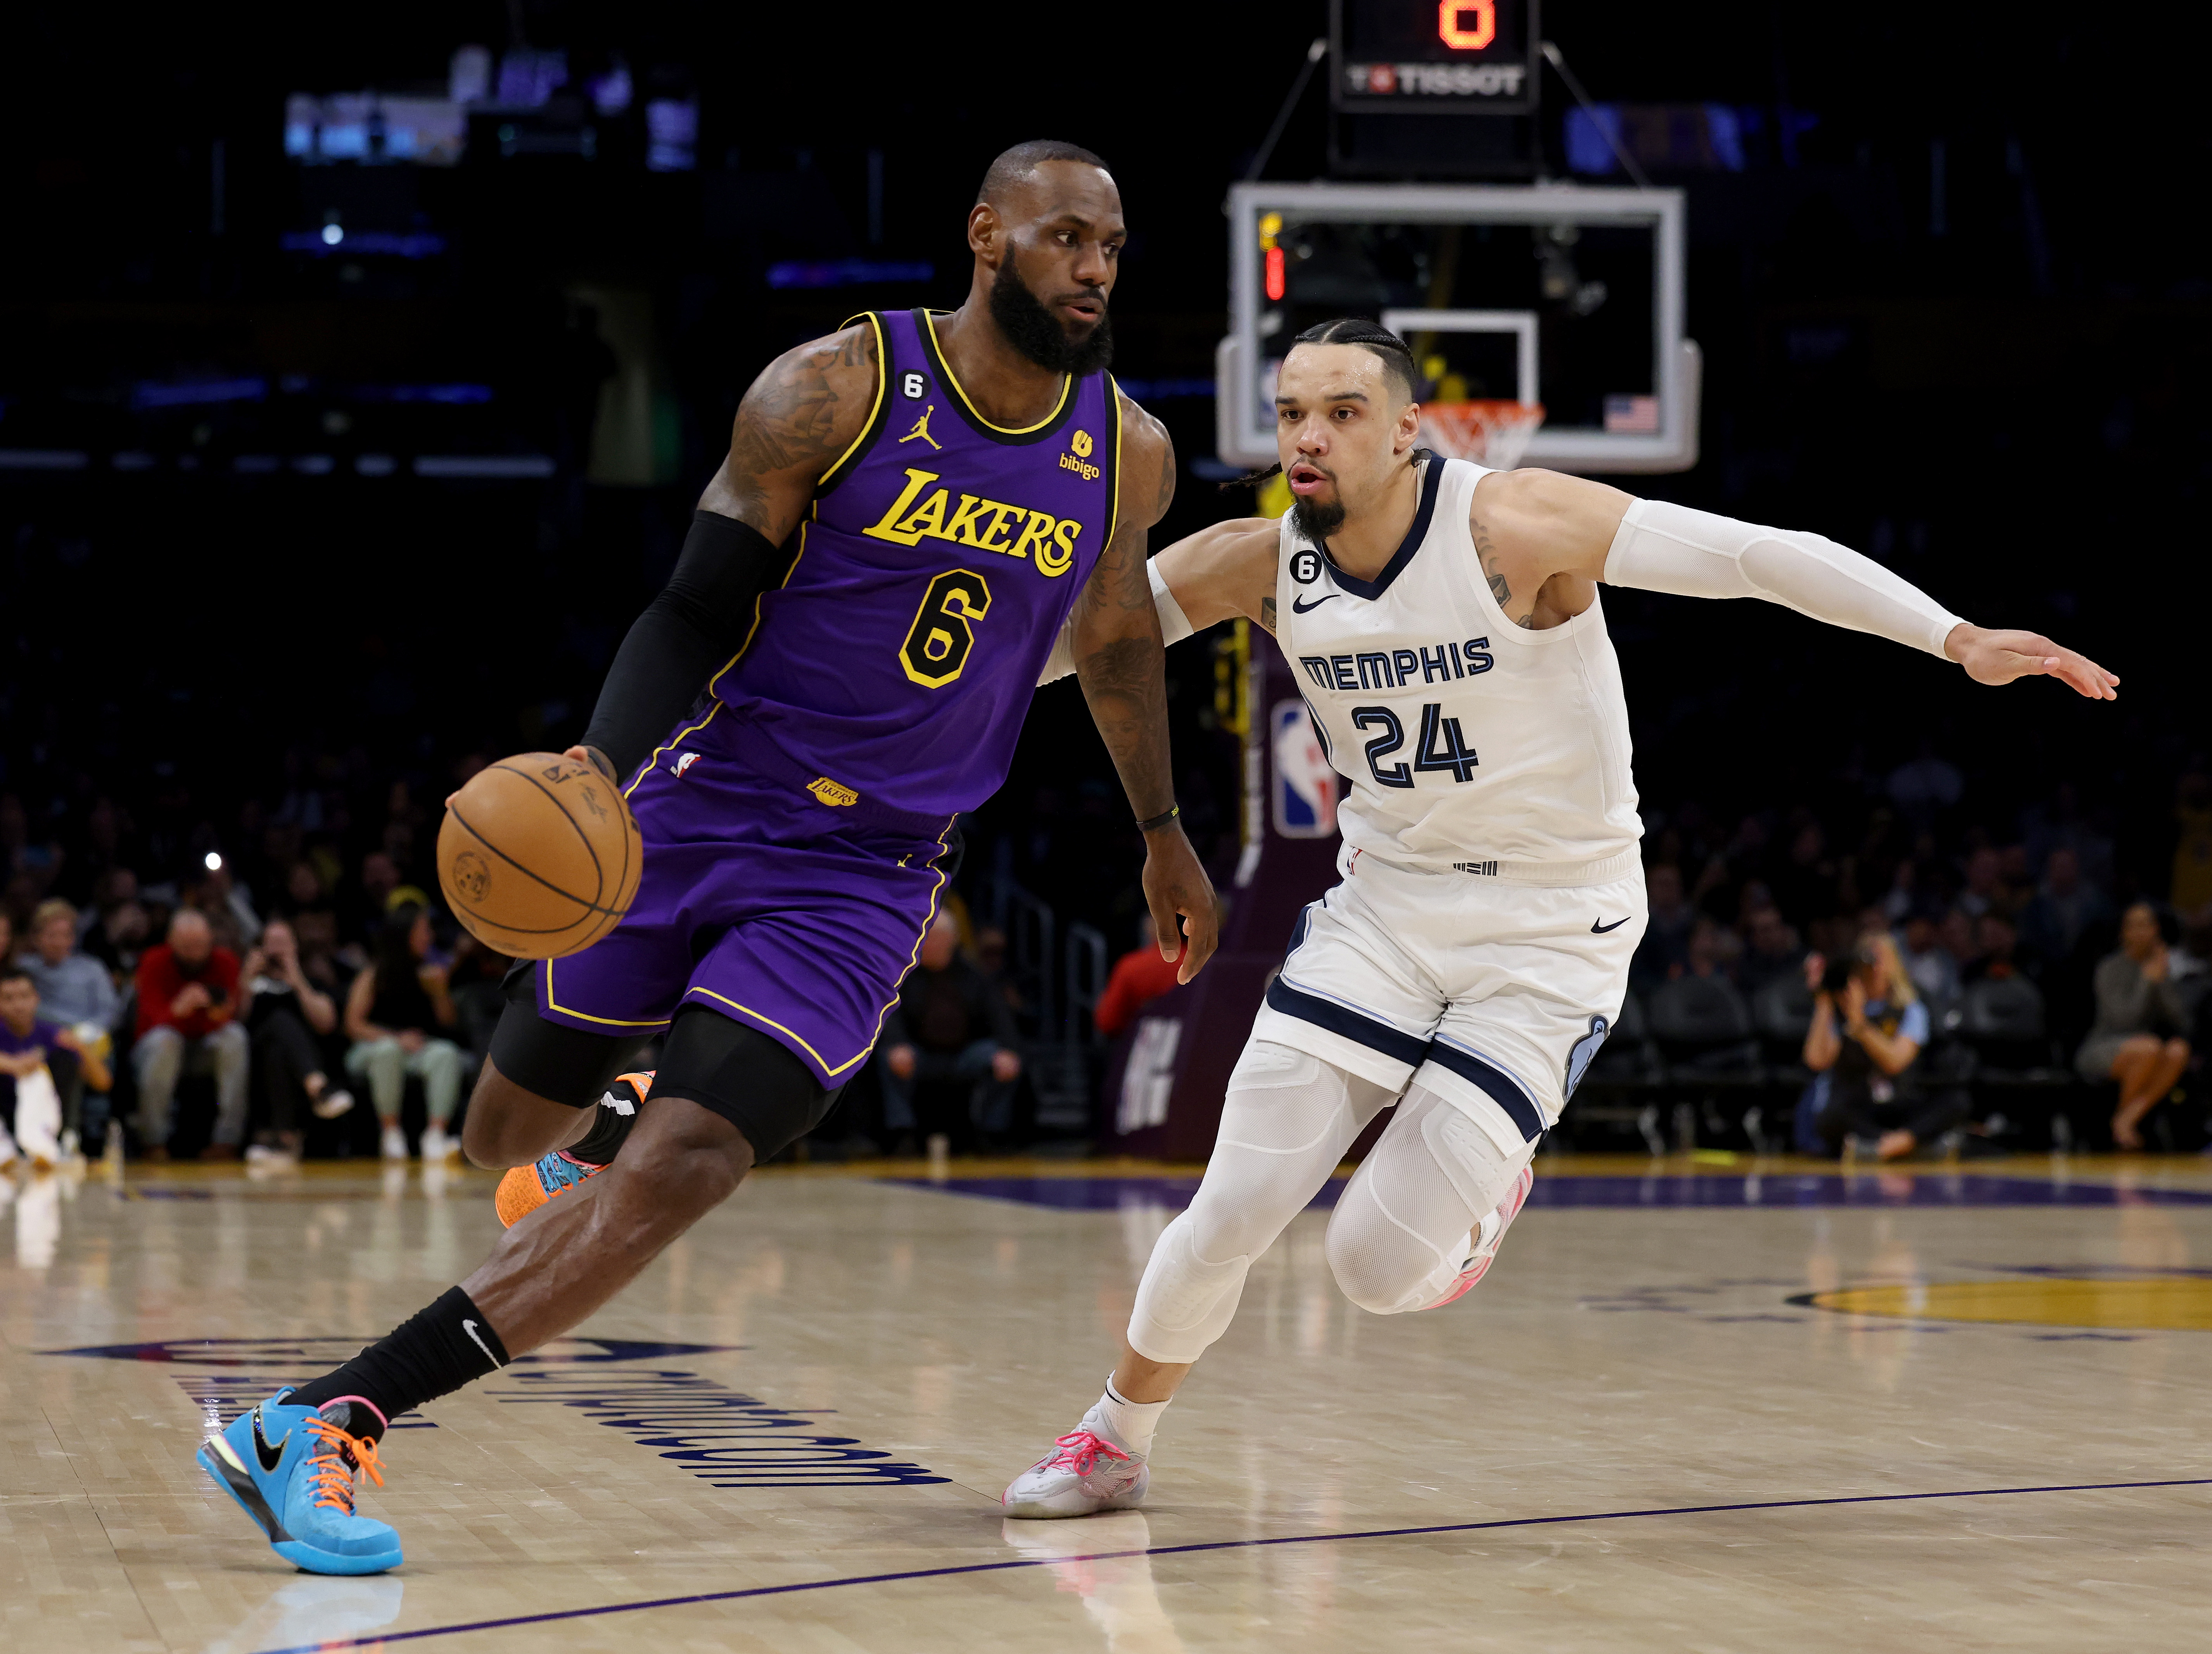 Lakers vs Grizzlies Odds, Time, Channel for Game 1